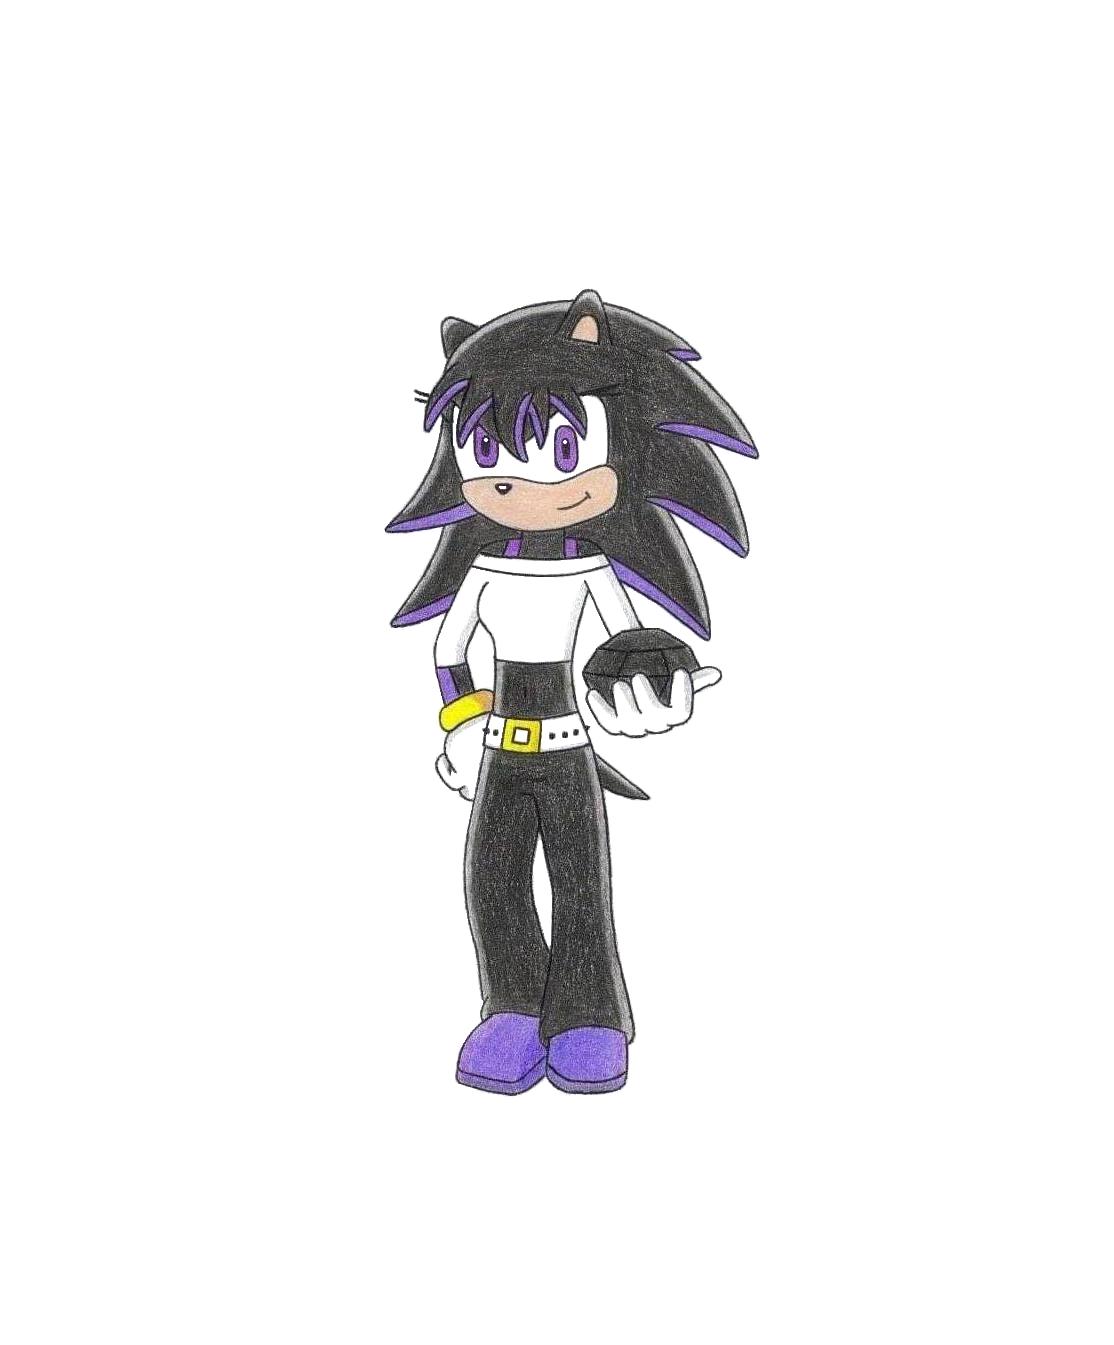 Eve the Hedgehog by Twister